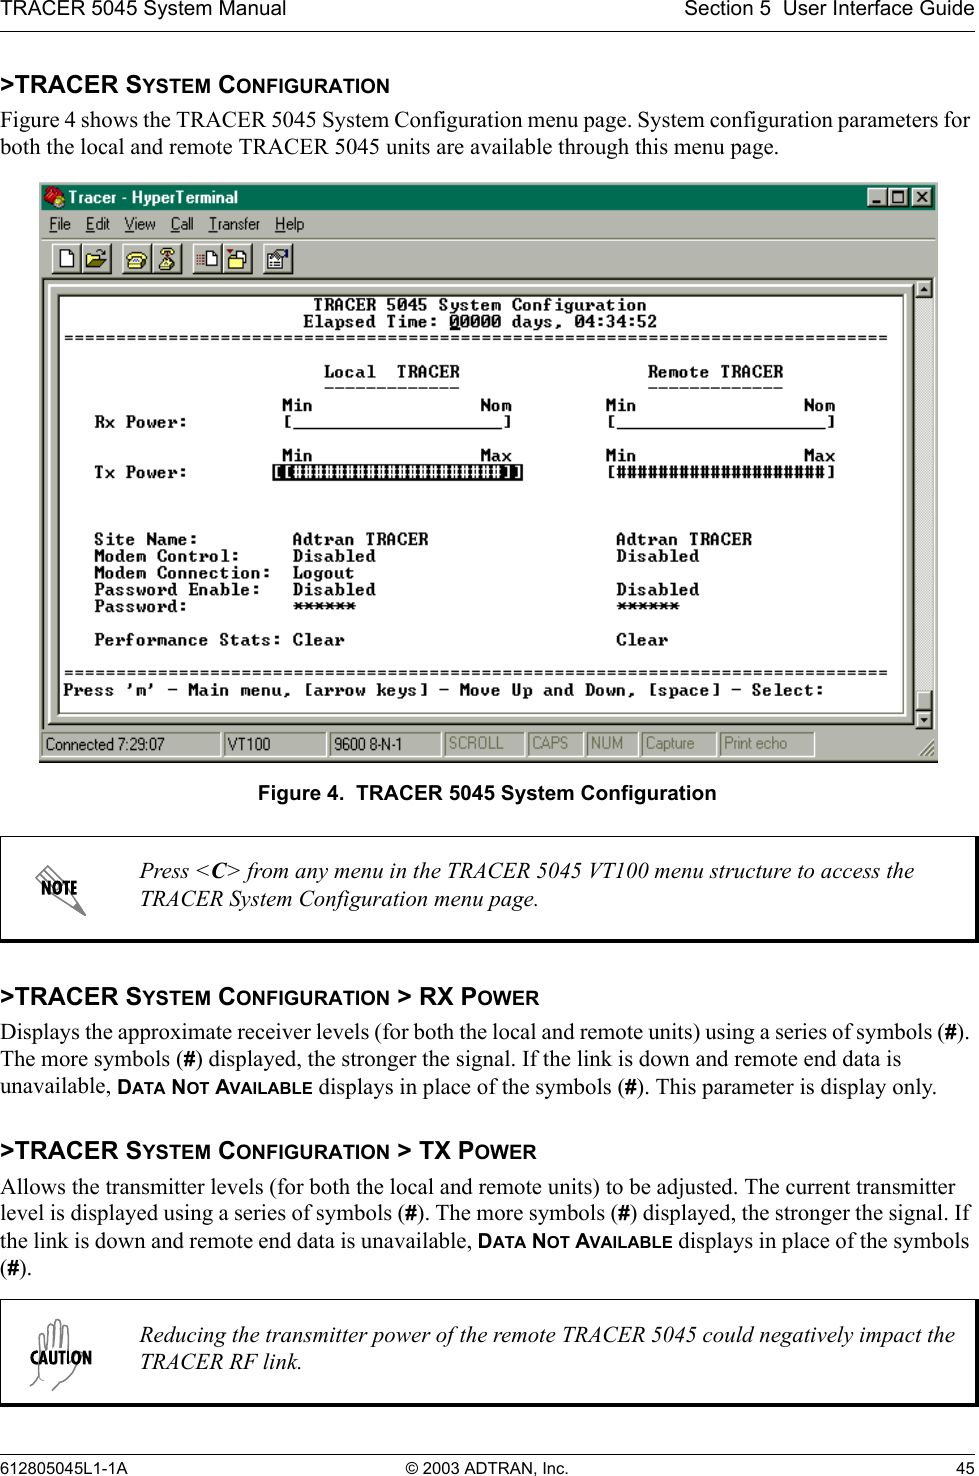 TRACER 5045 System Manual Section 5  User Interface Guide612805045L1-1A © 2003 ADTRAN, Inc. 45&gt;TRACER SYSTEM CONFIGURATIONFigure 4 shows the TRACER 5045 System Configuration menu page. System configuration parameters for both the local and remote TRACER 5045 units are available through this menu page.Figure 4.  TRACER 5045 System Configuration&gt;TRACER SYSTEM CONFIGURATION &gt; RX POWERDisplays the approximate receiver levels (for both the local and remote units) using a series of symbols (#). The more symbols (#) displayed, the stronger the signal. If the link is down and remote end data is unavailable, DATA NOT AVAILABLE displays in place of the symbols (#). This parameter is display only.&gt;TRACER SYSTEM CONFIGURATION &gt; TX POWERAllows the transmitter levels (for both the local and remote units) to be adjusted. The current transmitter level is displayed using a series of symbols (#). The more symbols (#) displayed, the stronger the signal. If the link is down and remote end data is unavailable, DATA NOT AVAILABLE displays in place of the symbols (#).Press &lt;C&gt; from any menu in the TRACER 5045 VT100 menu structure to access the TRACER System Configuration menu page.Reducing the transmitter power of the remote TRACER 5045 could negatively impact the TRACER RF link.